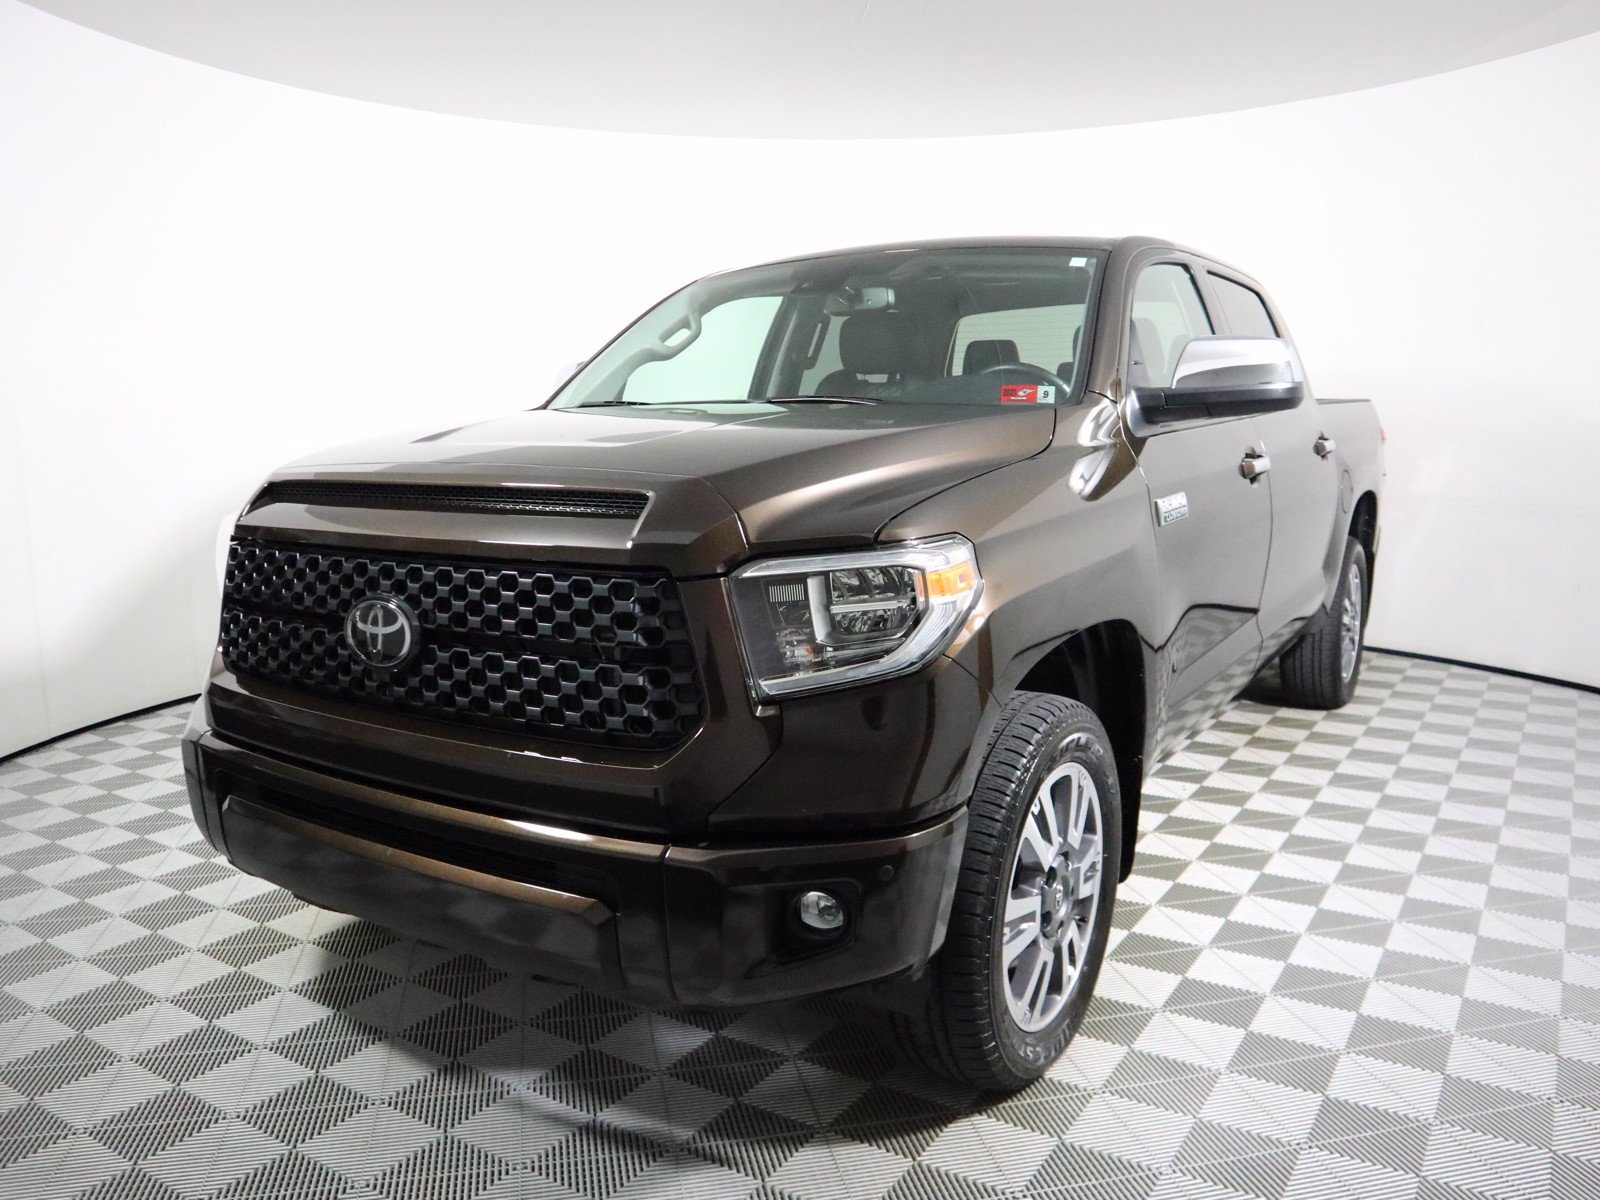 Pre-Owned 2020 Toyota Tundra 4WD Crew Cab Pickup in Parkersburg #